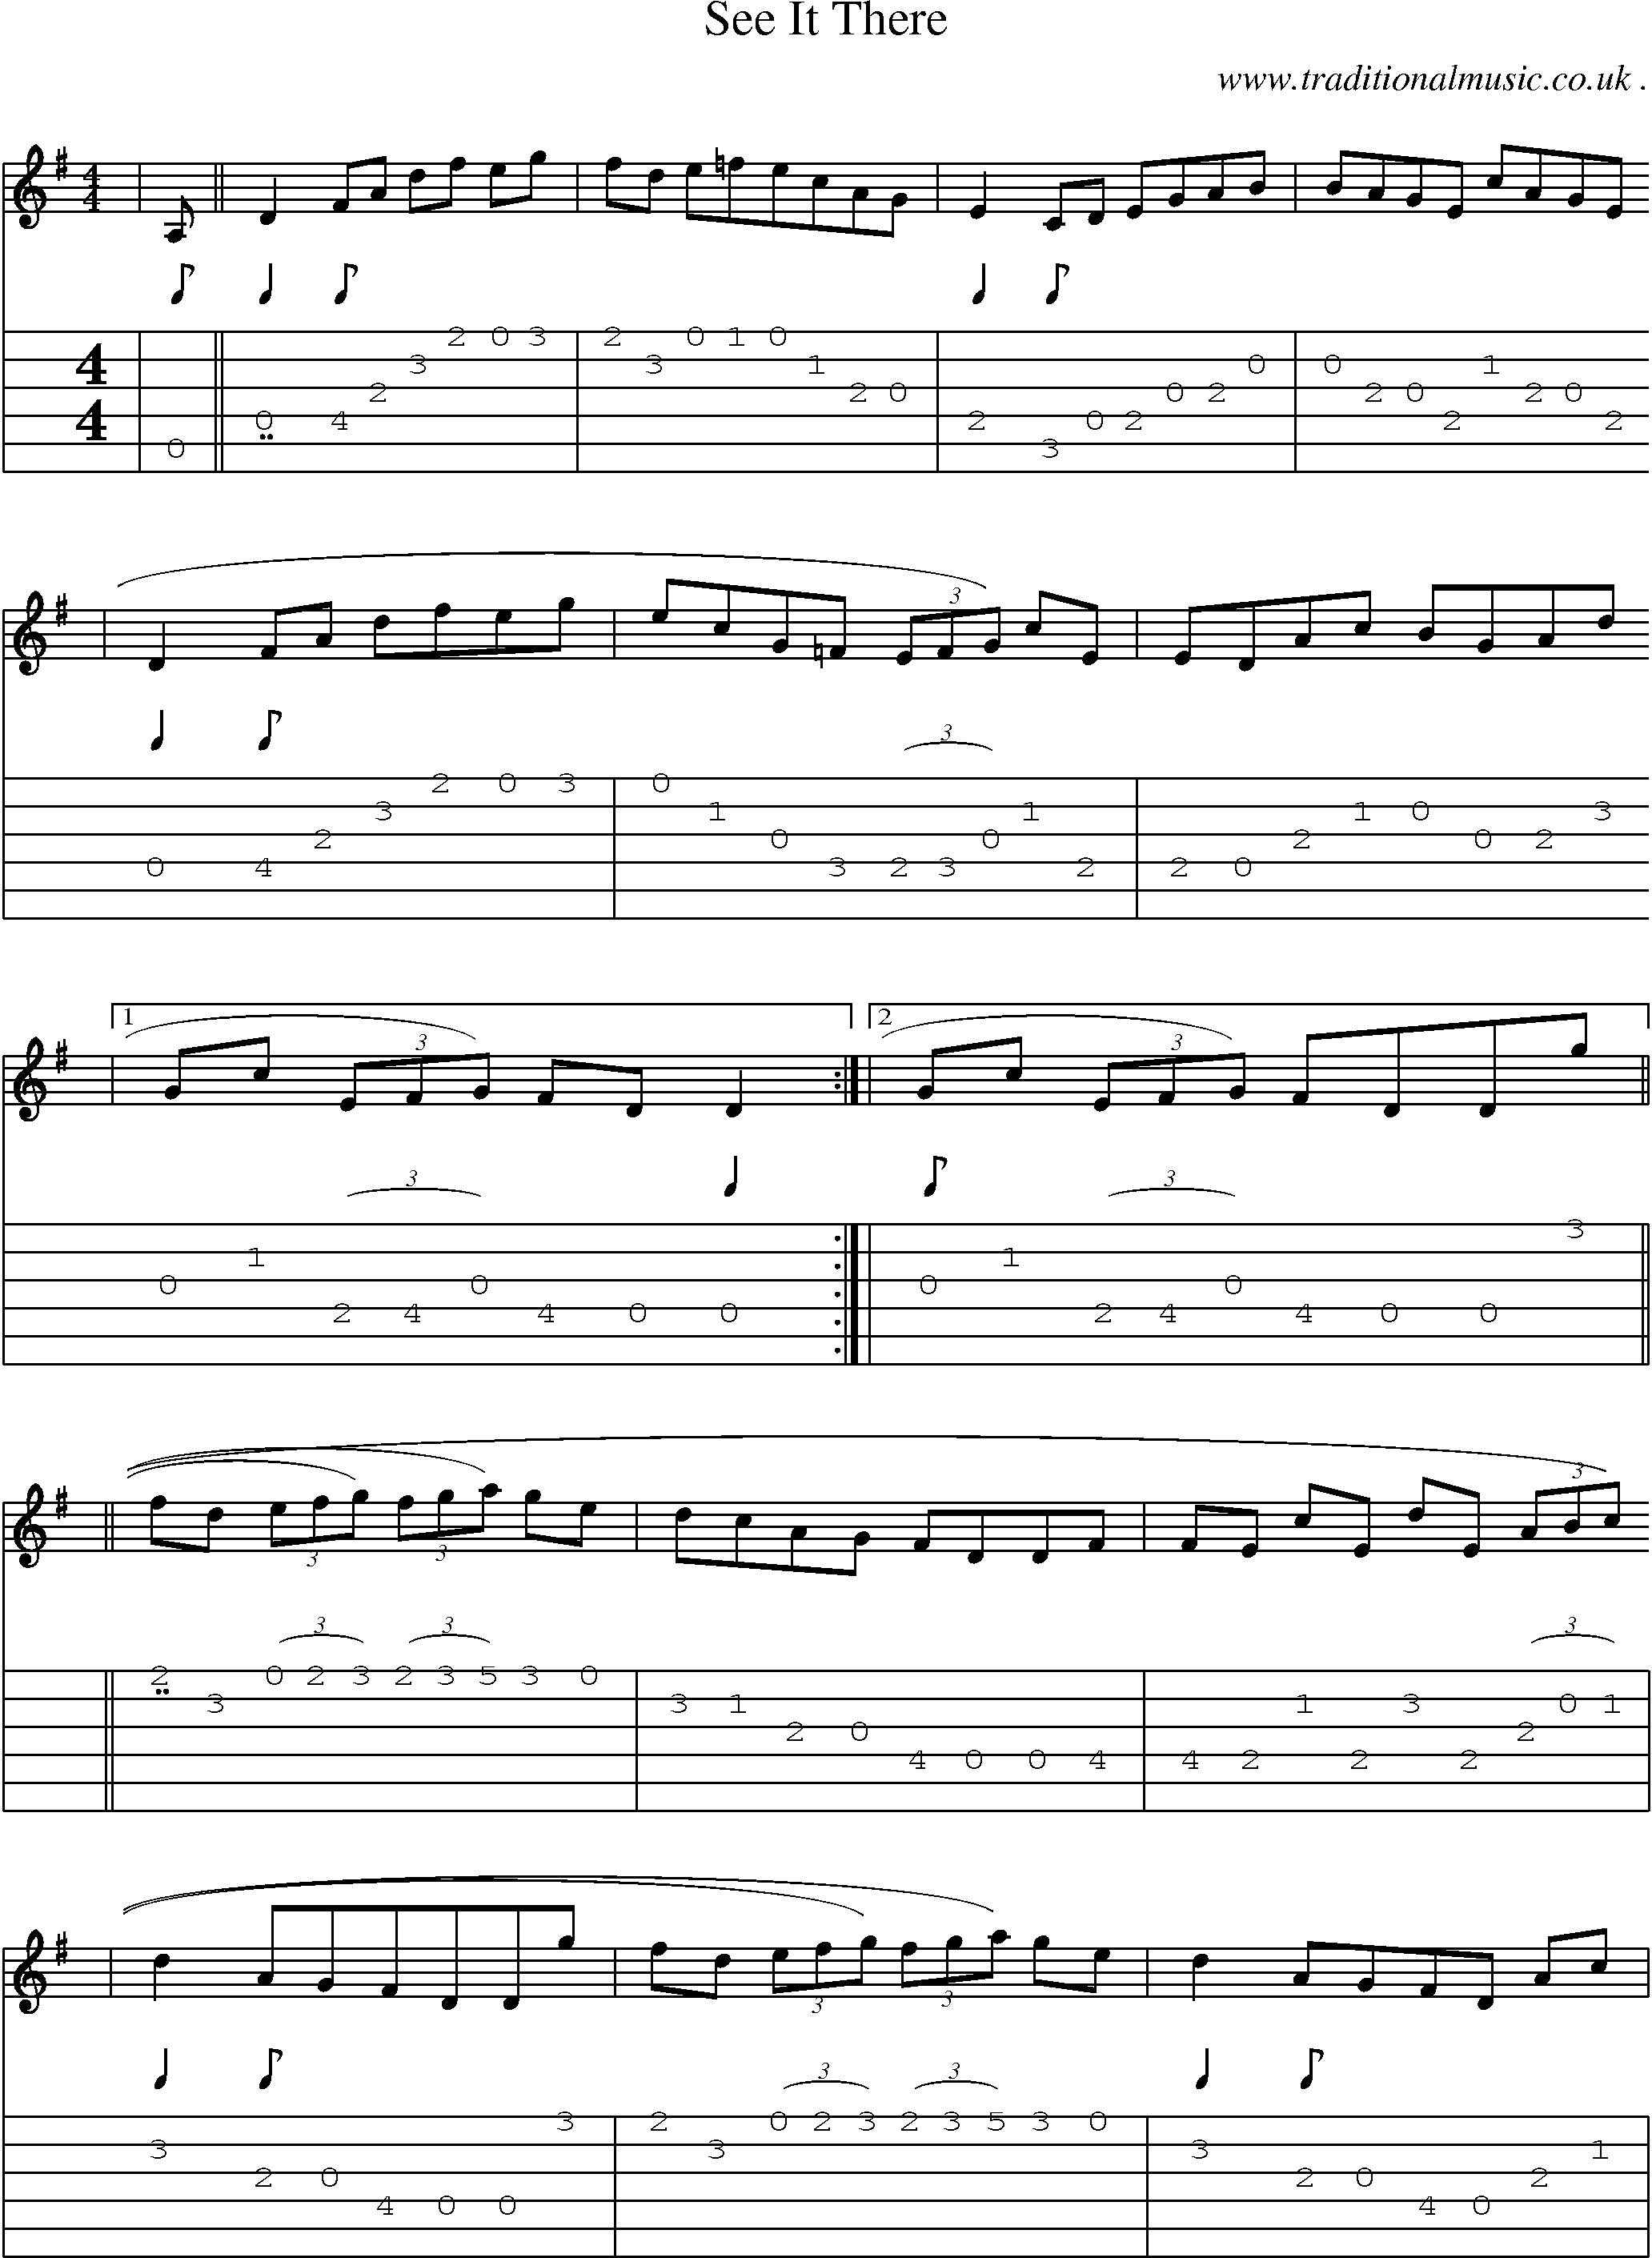 Sheet-Music and Guitar Tabs for See It There